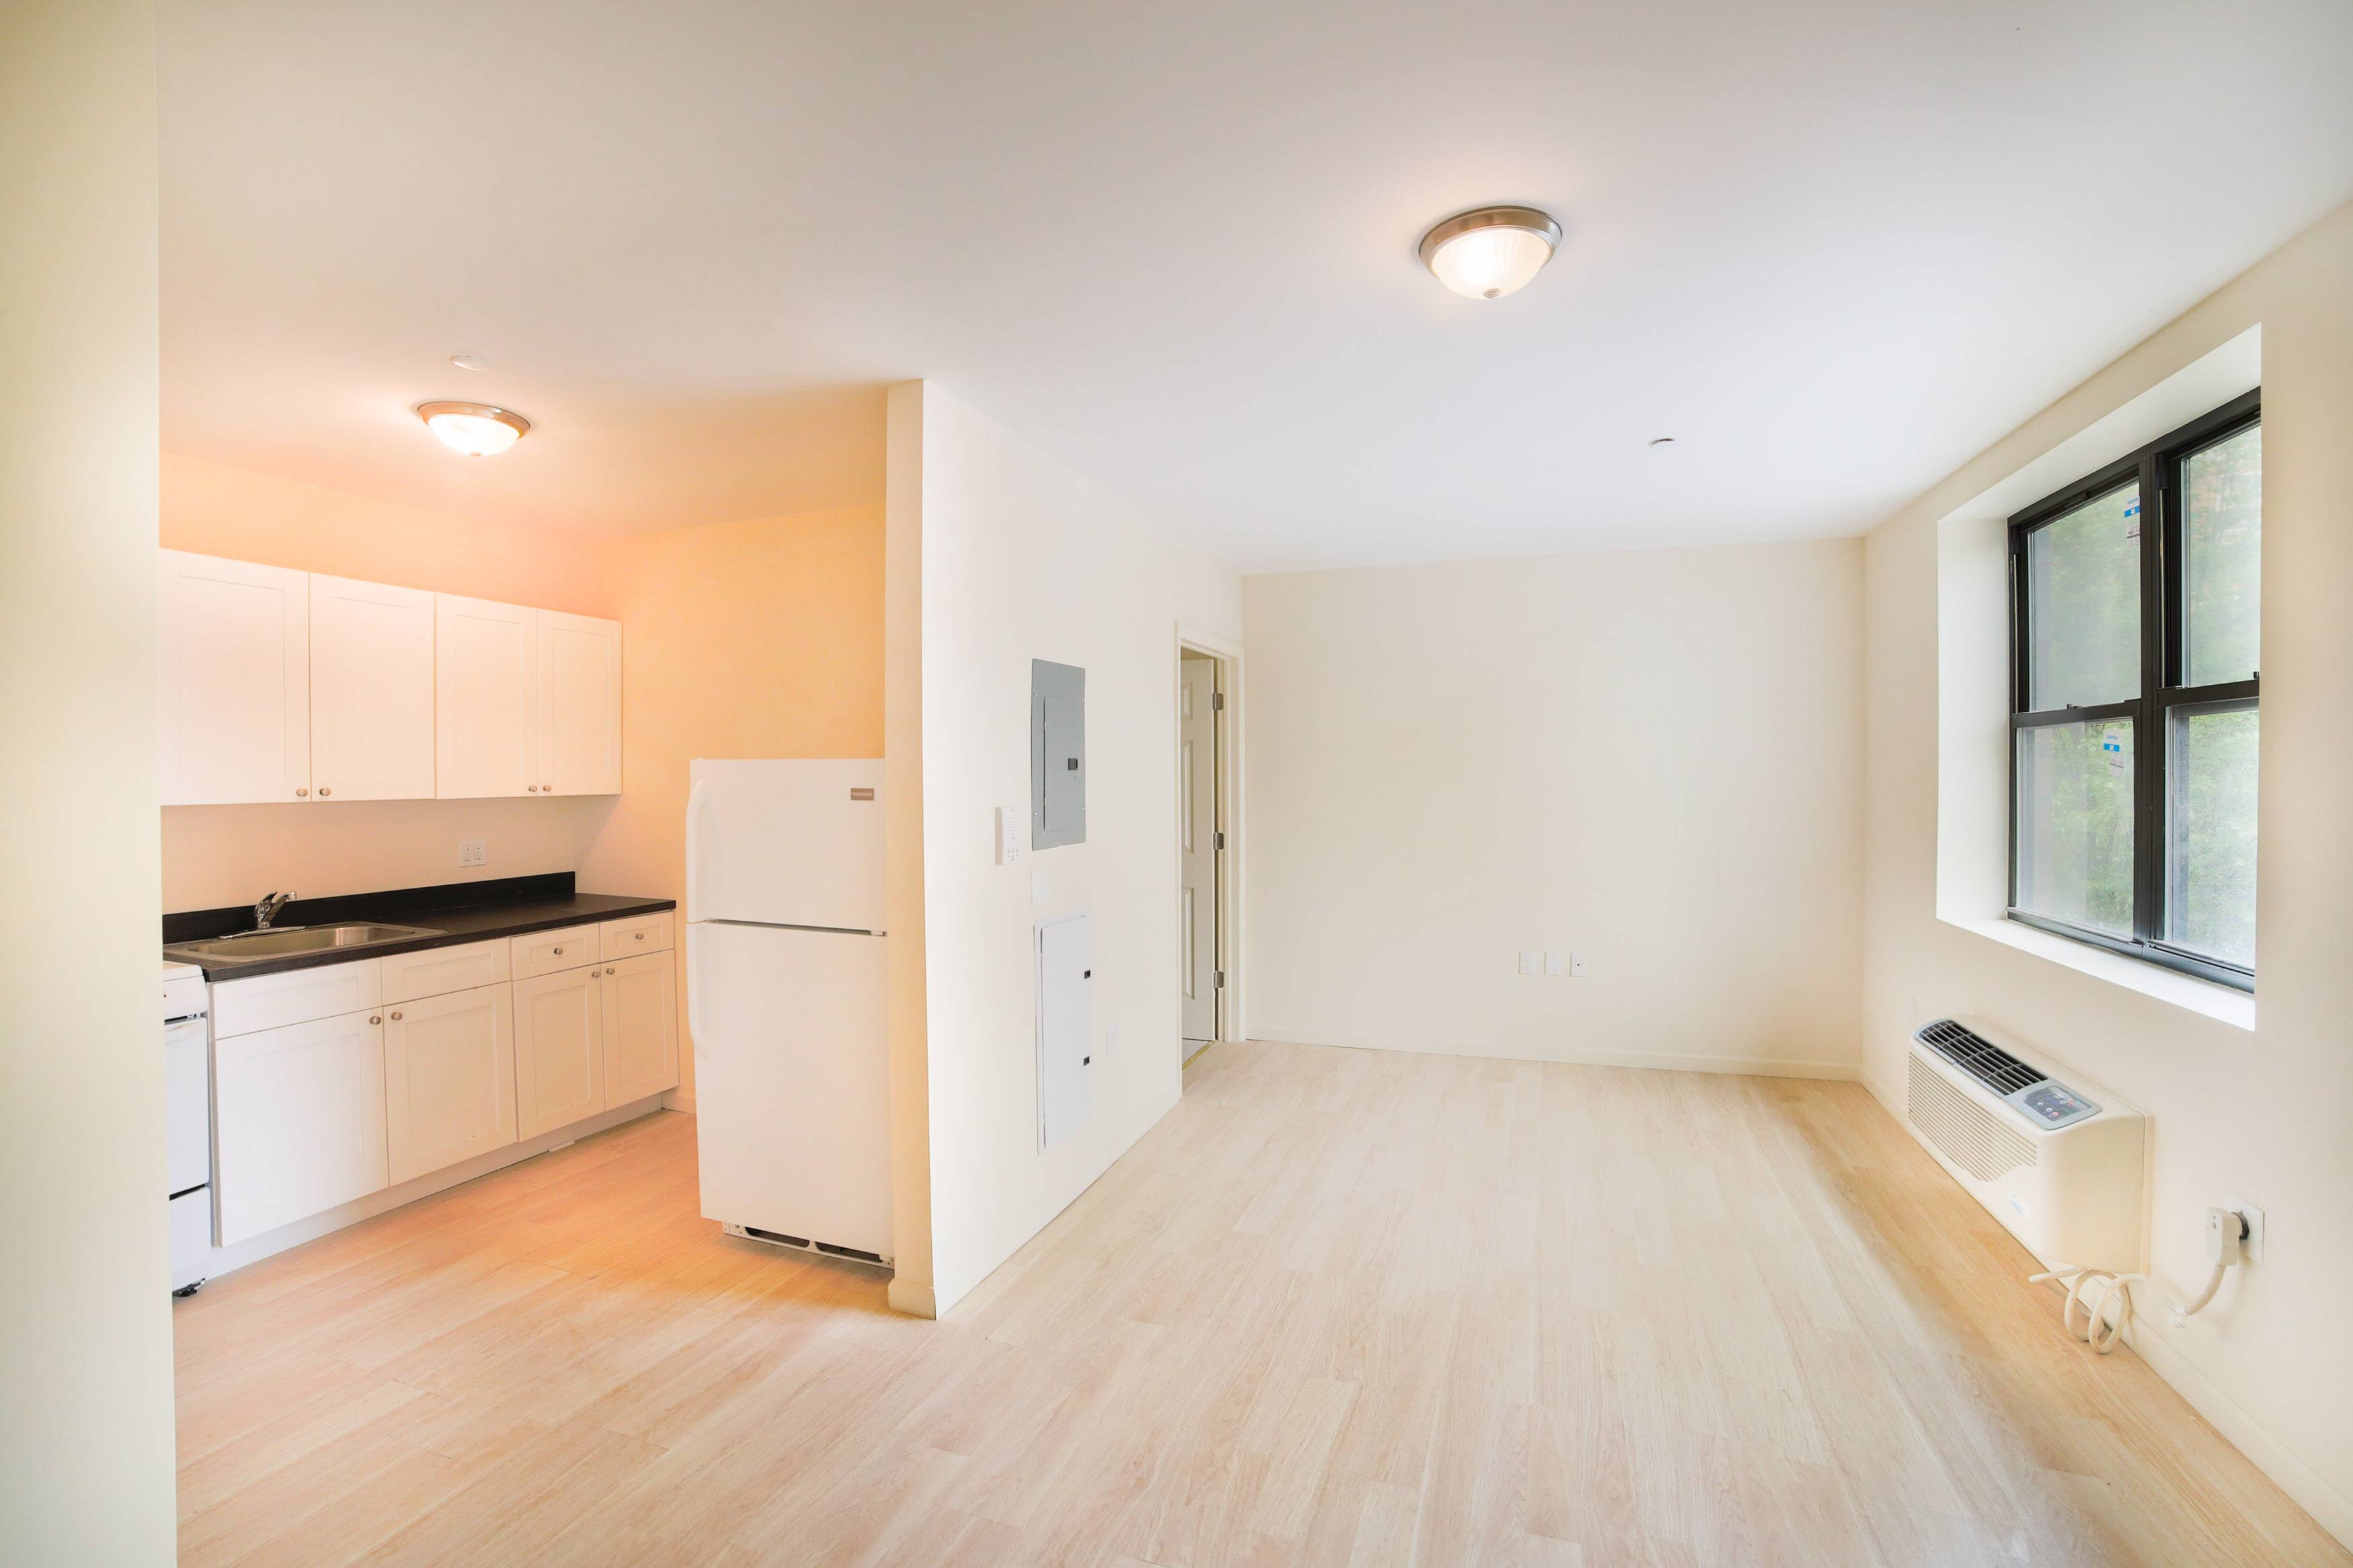 1674 Park Ave: NO FEE! New Construction 1 Bedroom Apartment For Rent in Harlem